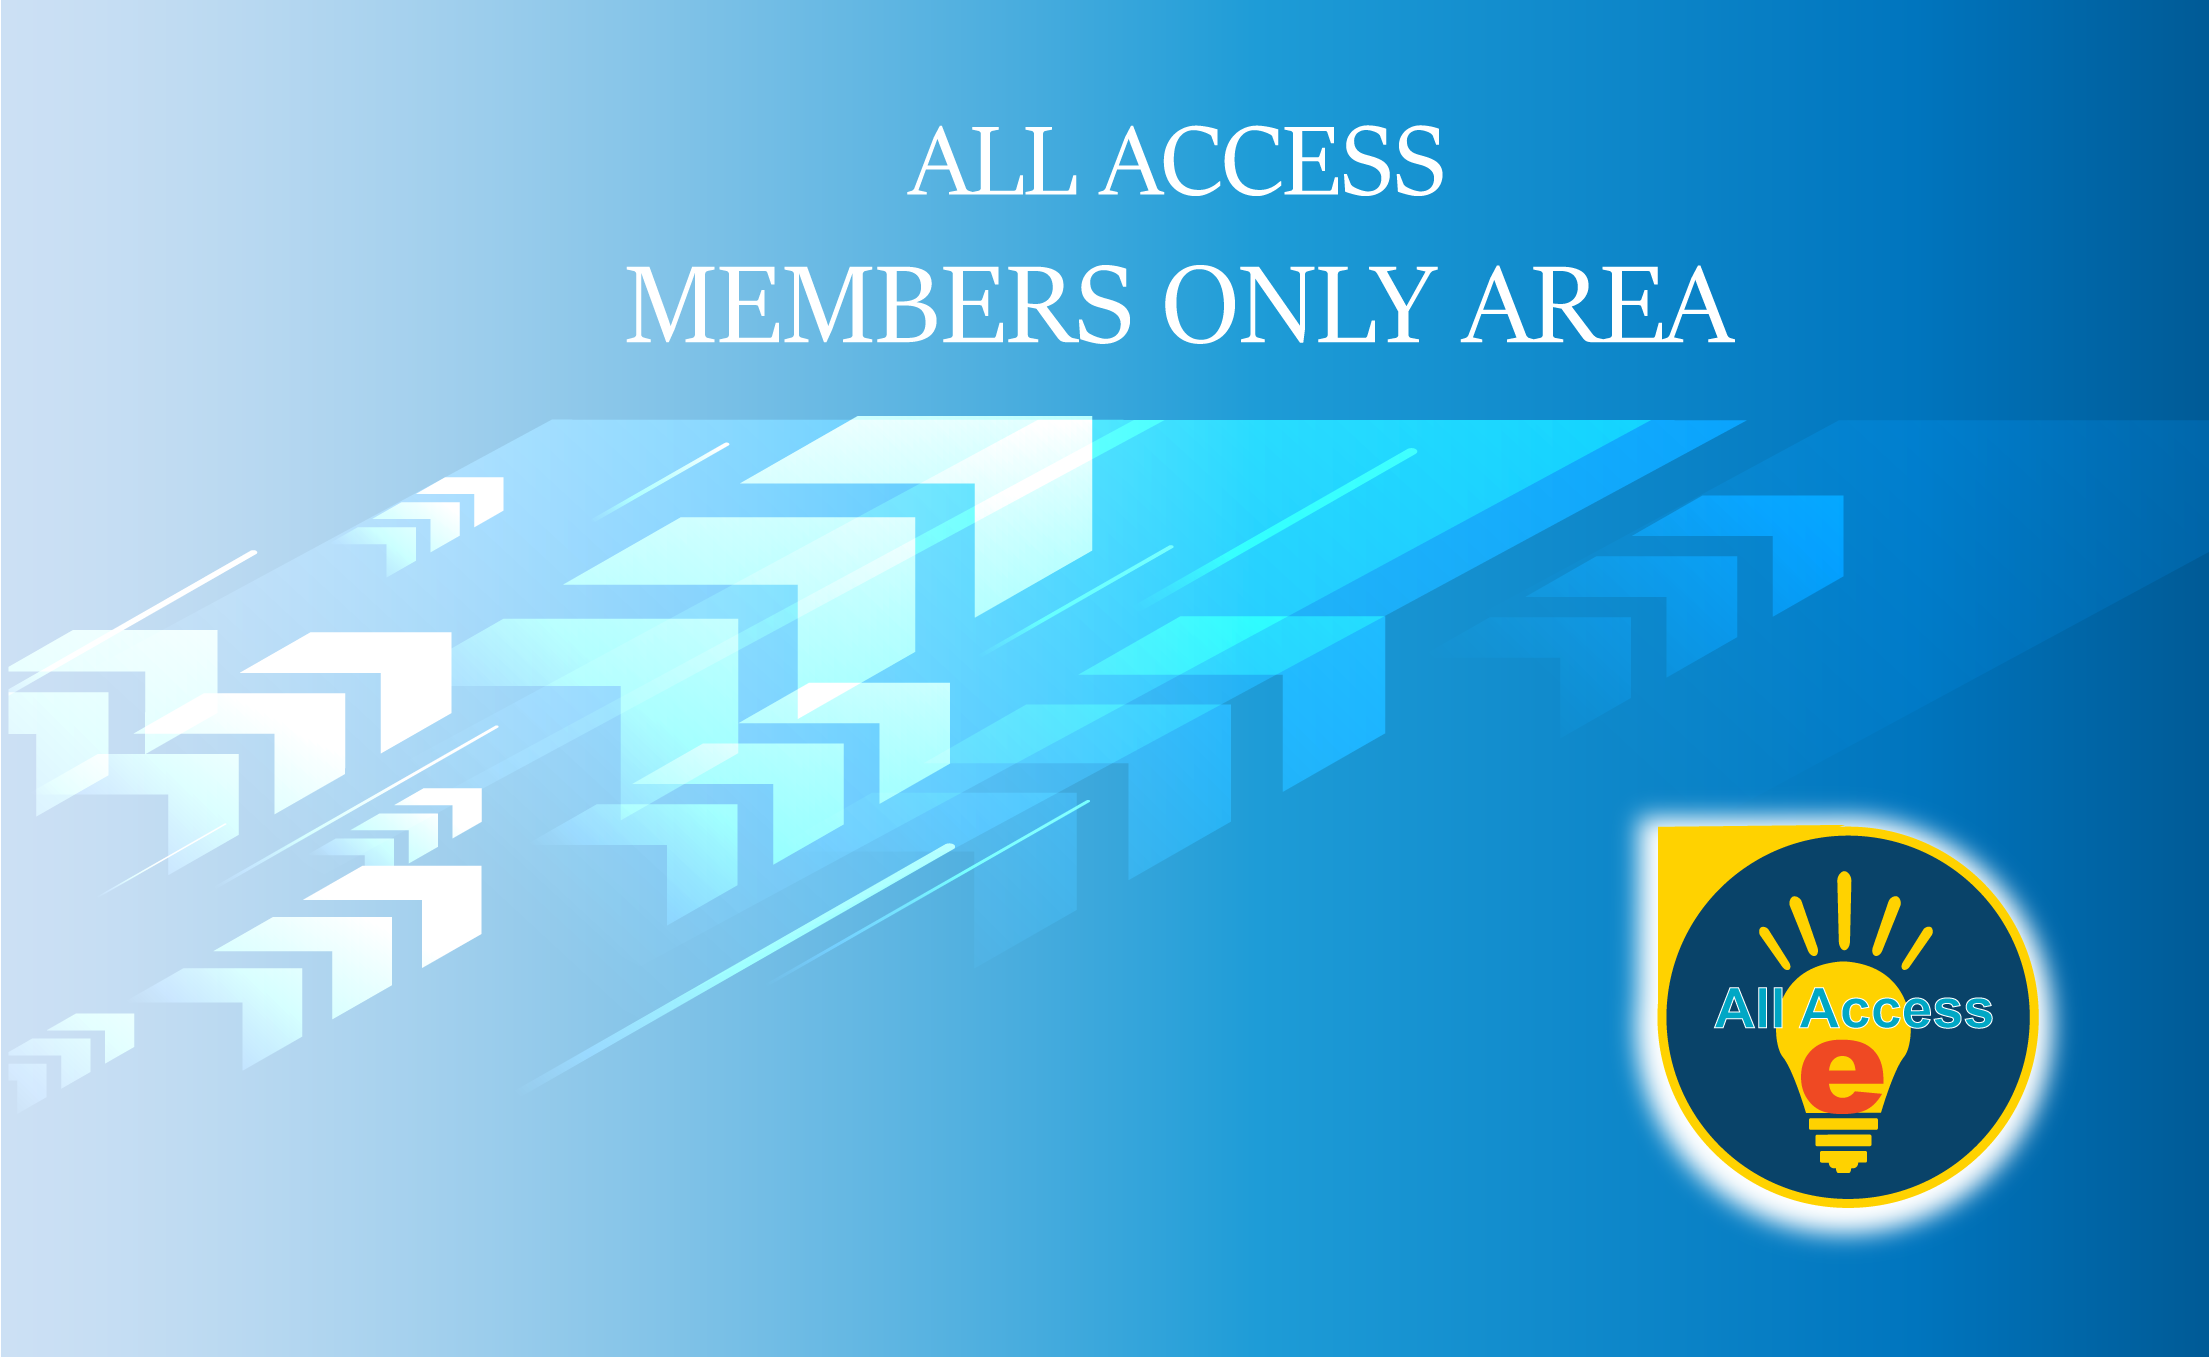 Members Only Area